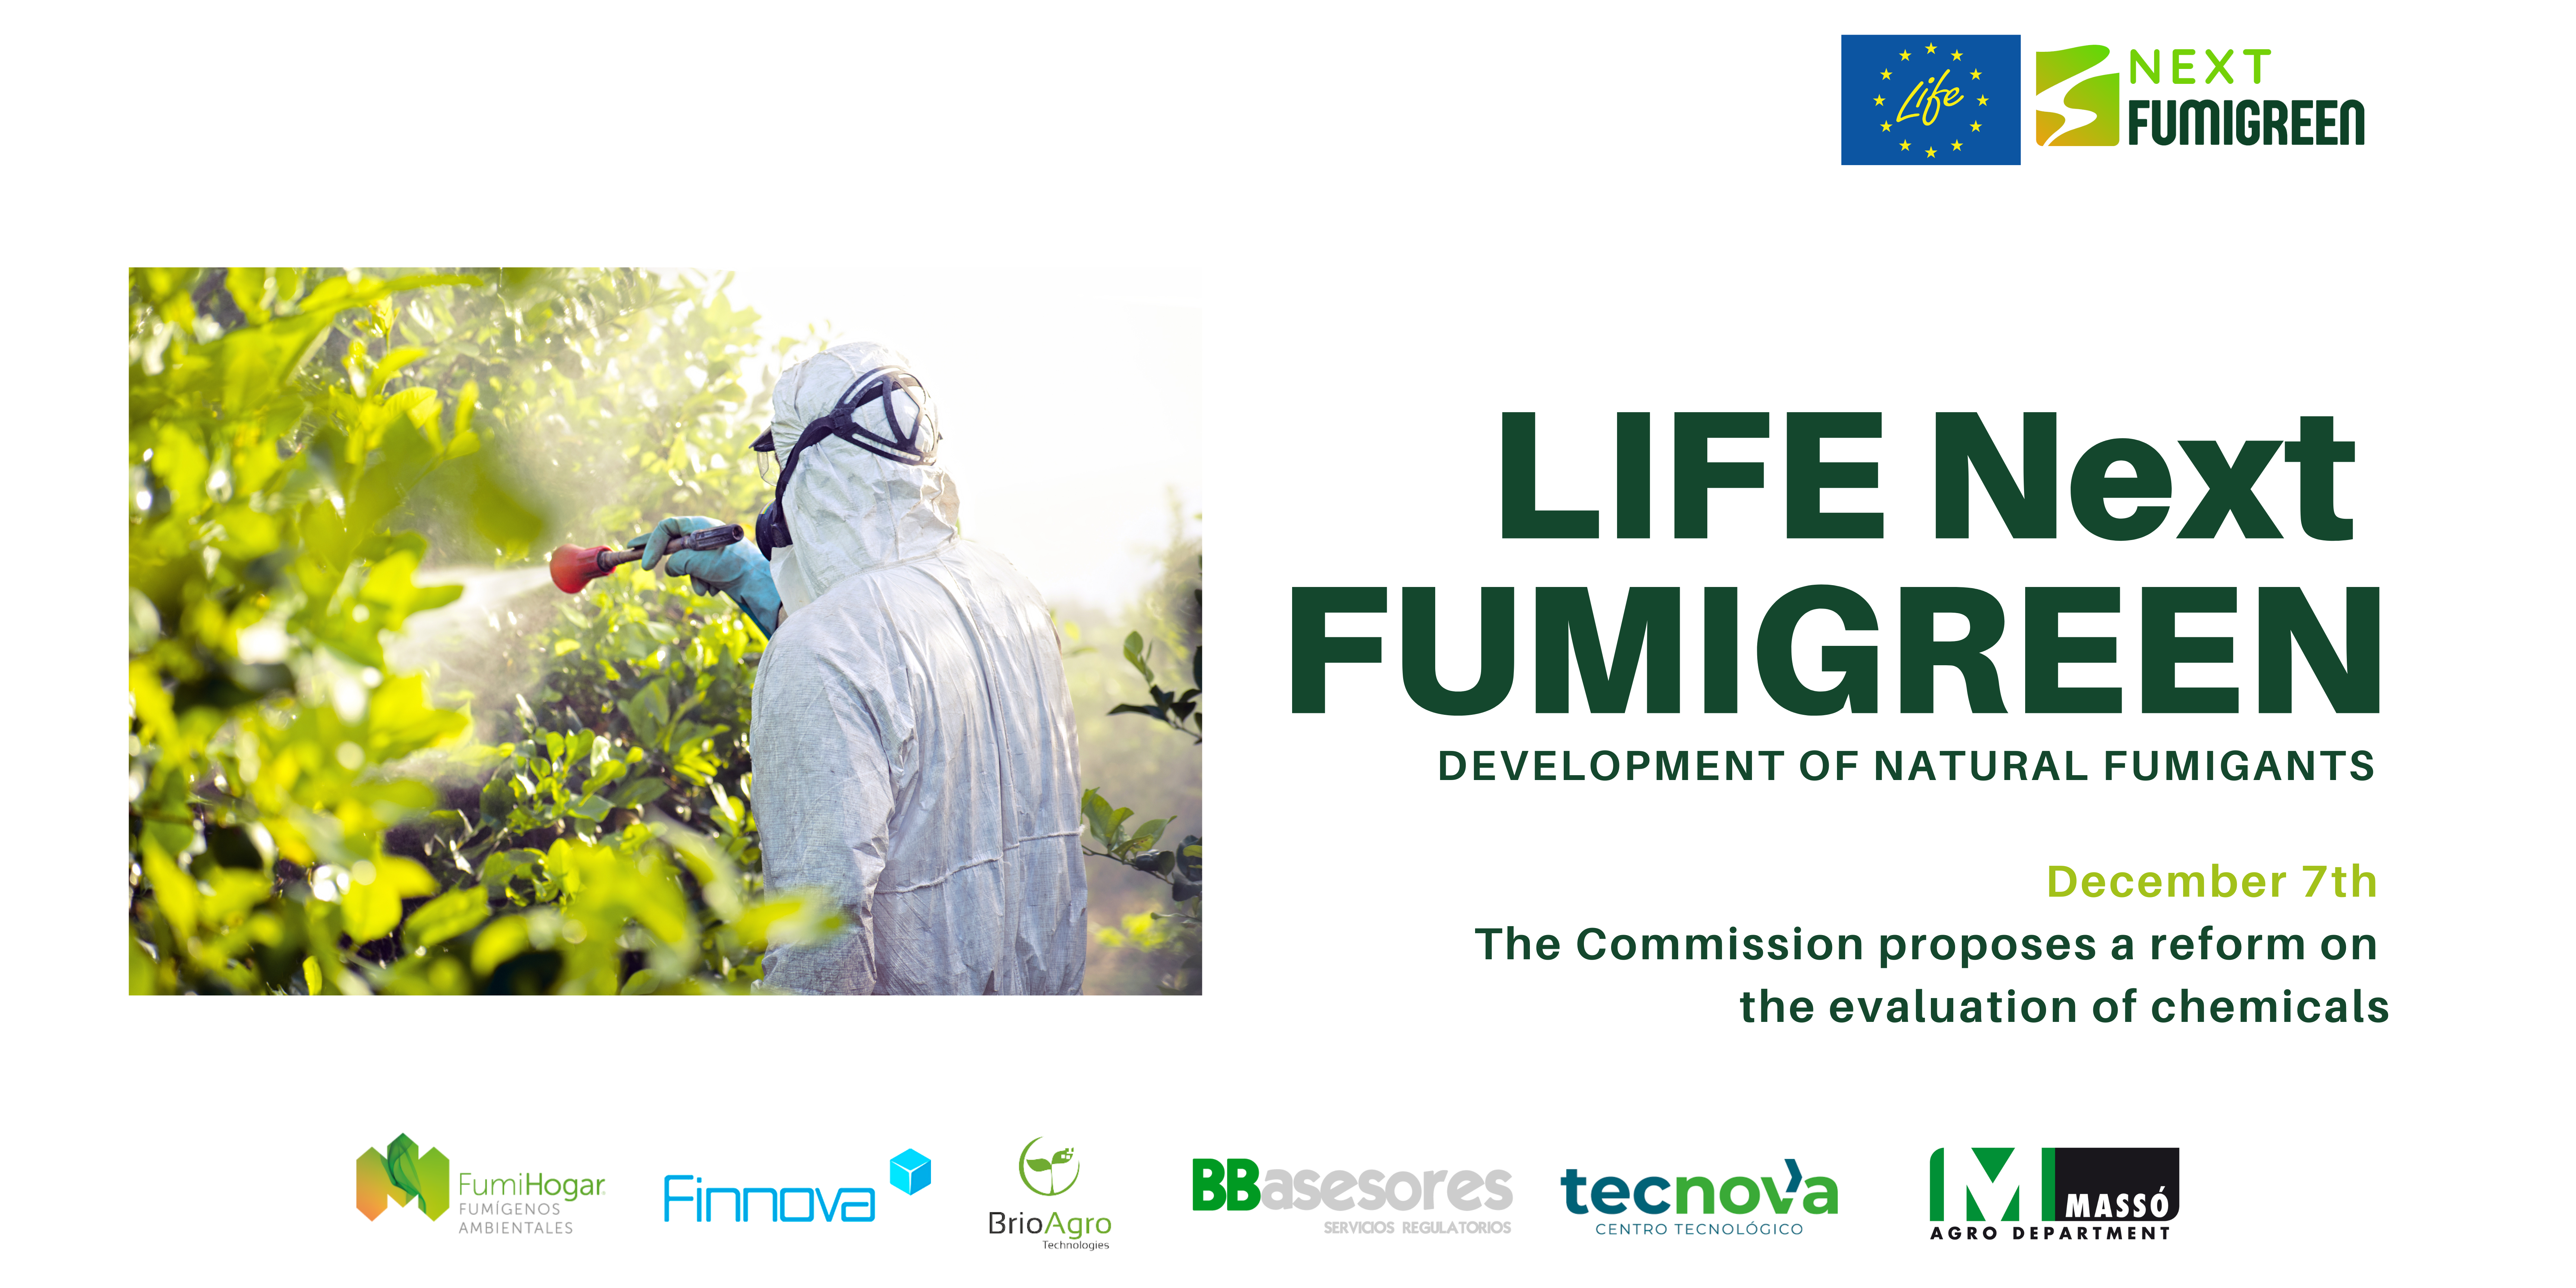 LIFE NextFUMIGREEN welcomes the European Commission’s proposal on the reform of the evaluation of chemical substances